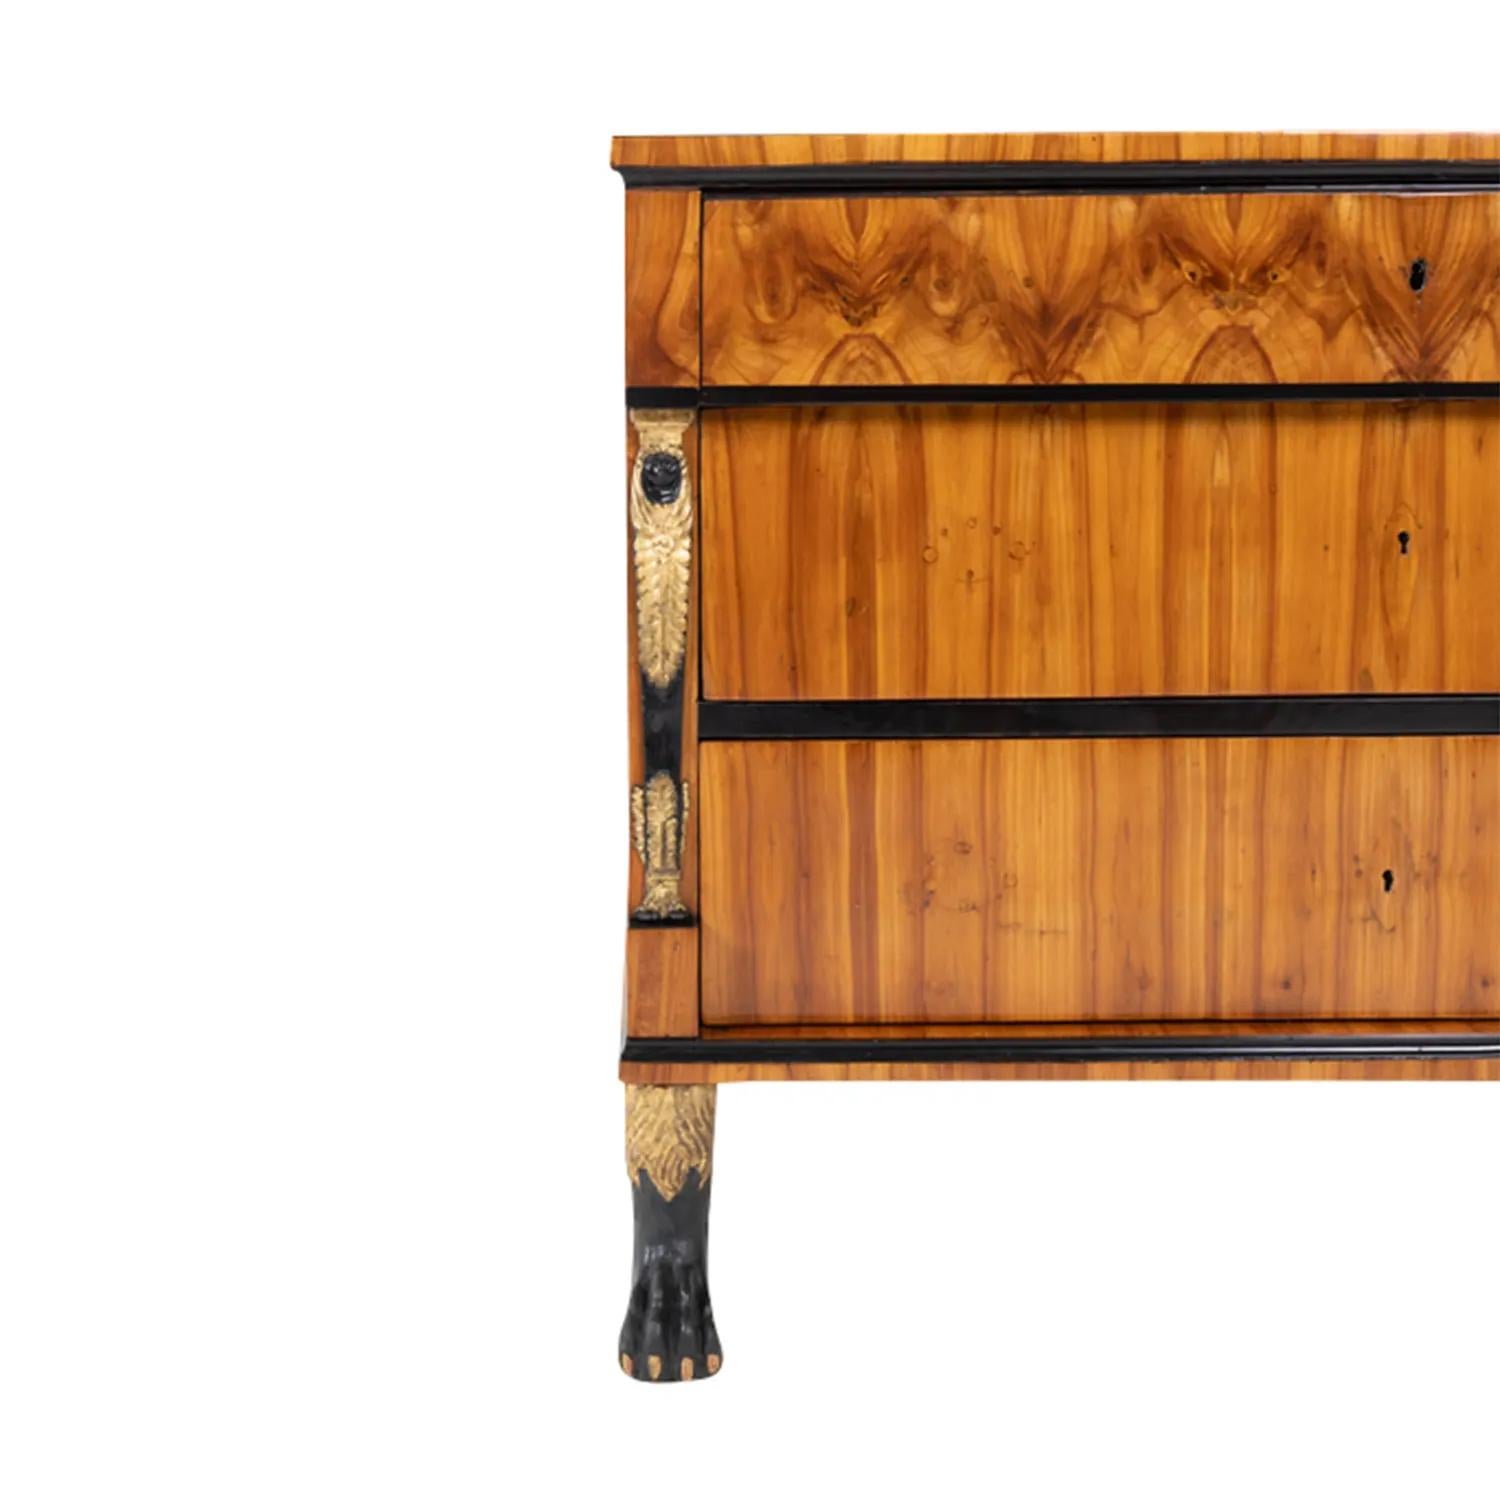 19th Century German Biedermeier Cherrywood Chest of Drawers - Antique Commode For Sale 4